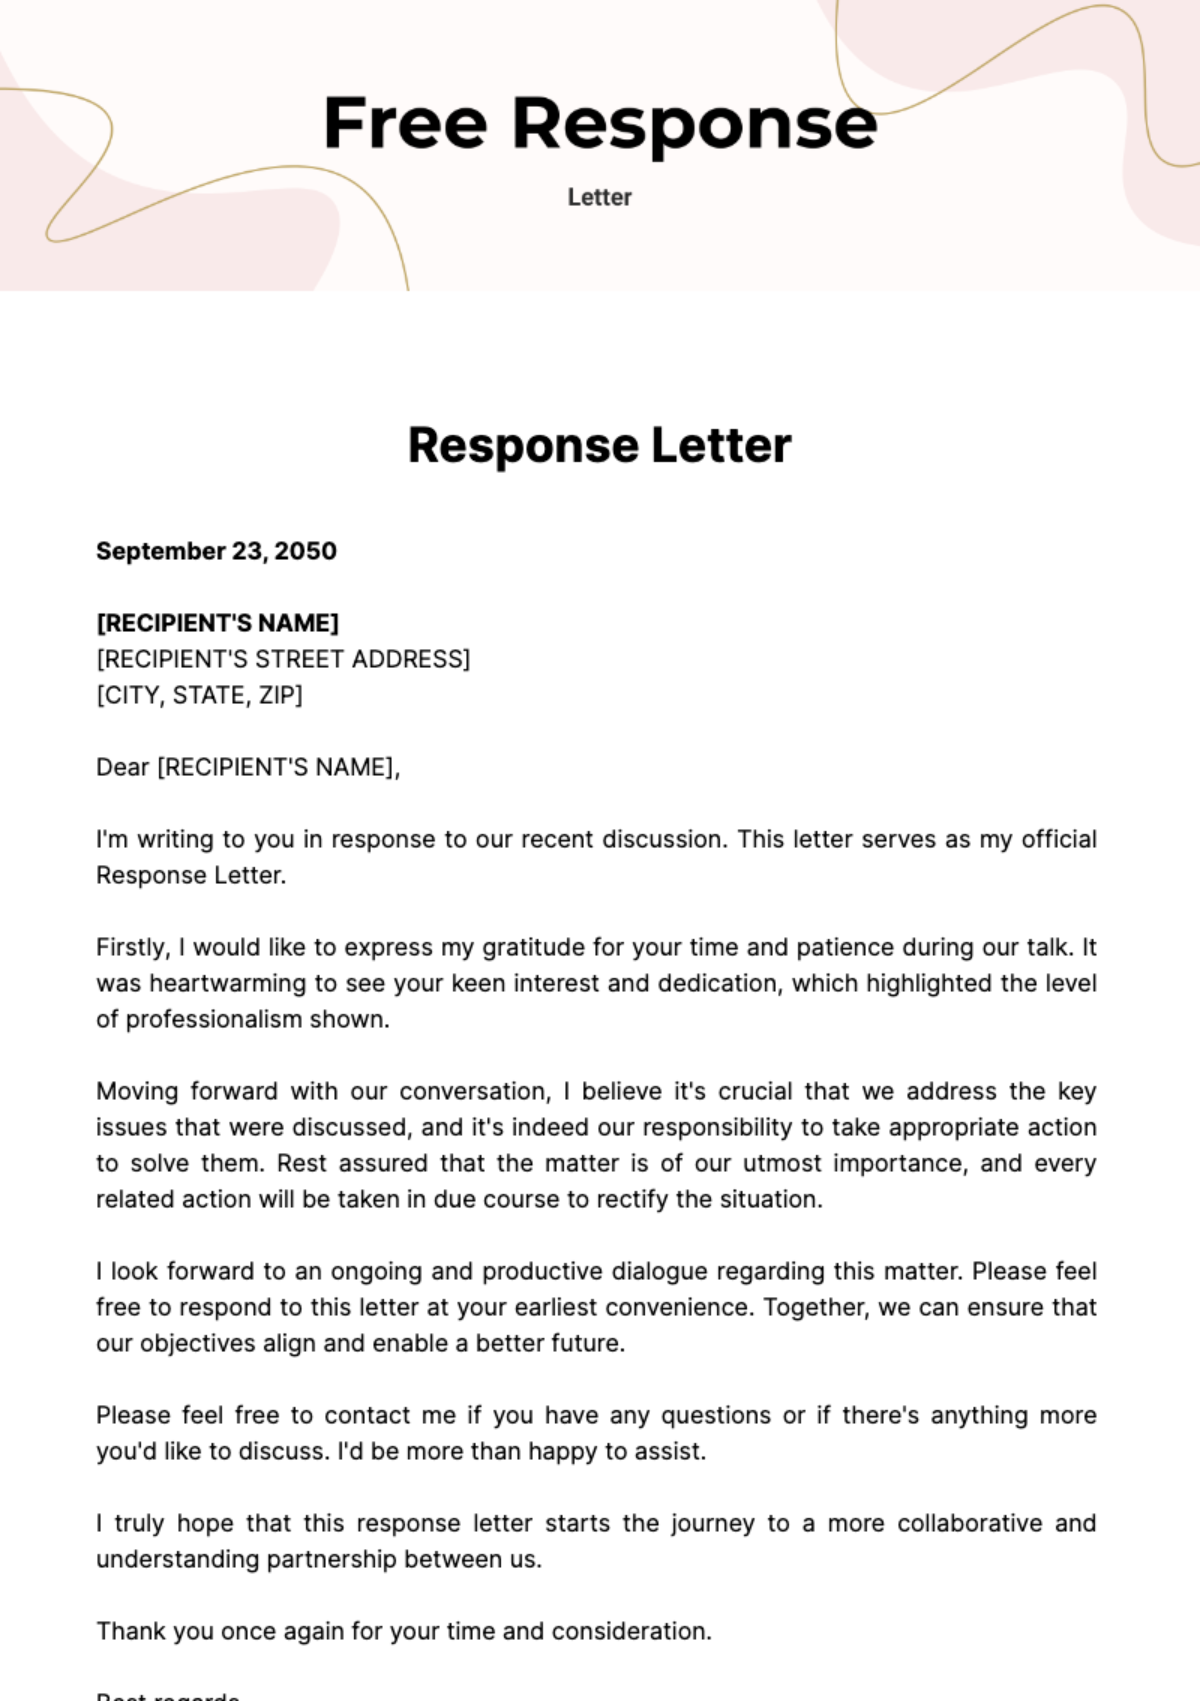 Free Response Letter Template